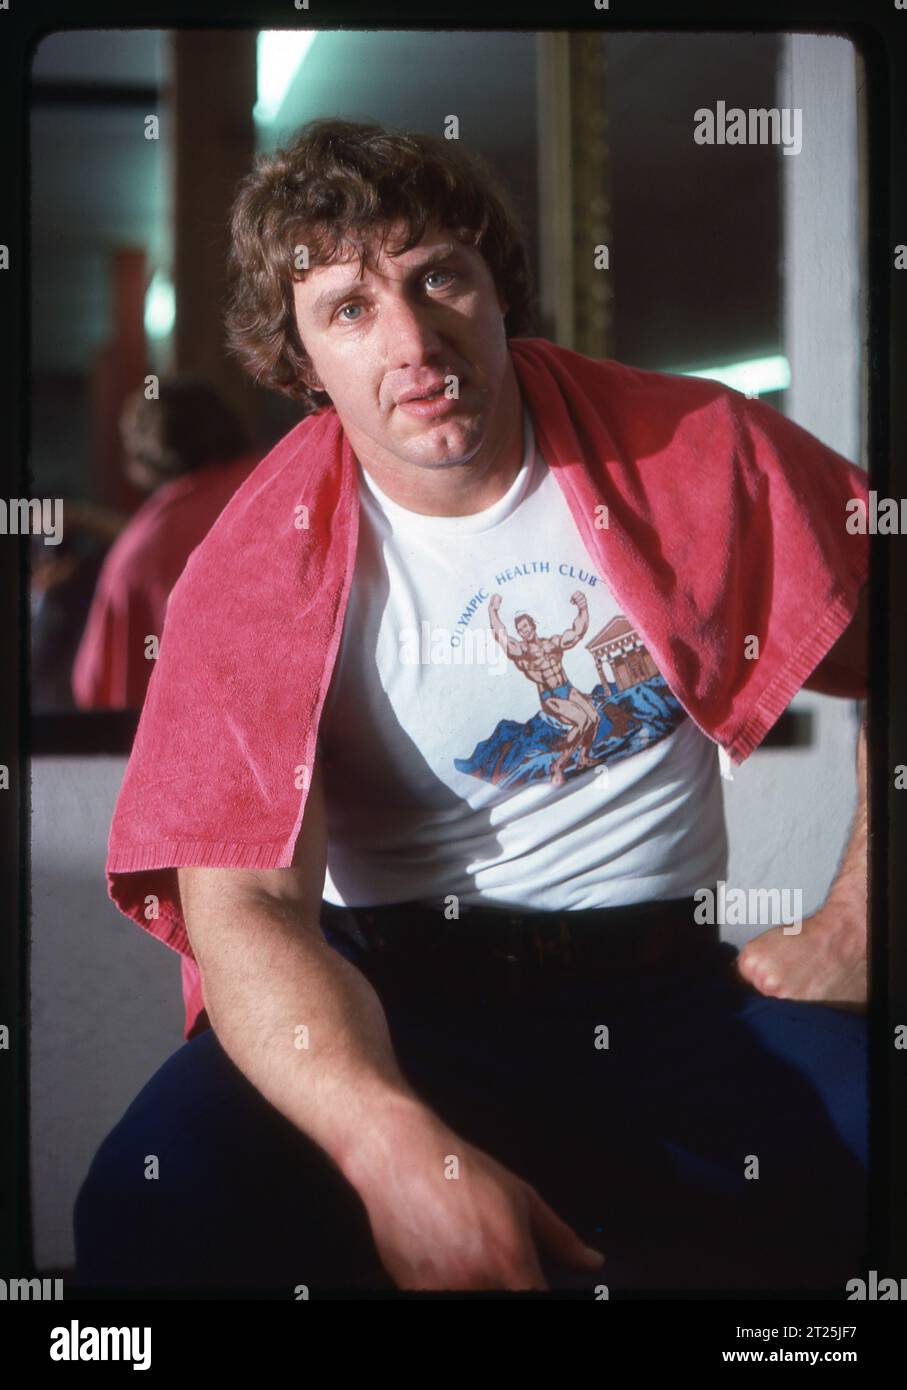 Four time olympic gold medalist Al Oerter cools off after a weight lifting workout at a gym in Long Island. He won his medals in the discuss throwing events and is one of the greatest Olympians in American history, Stock Photo